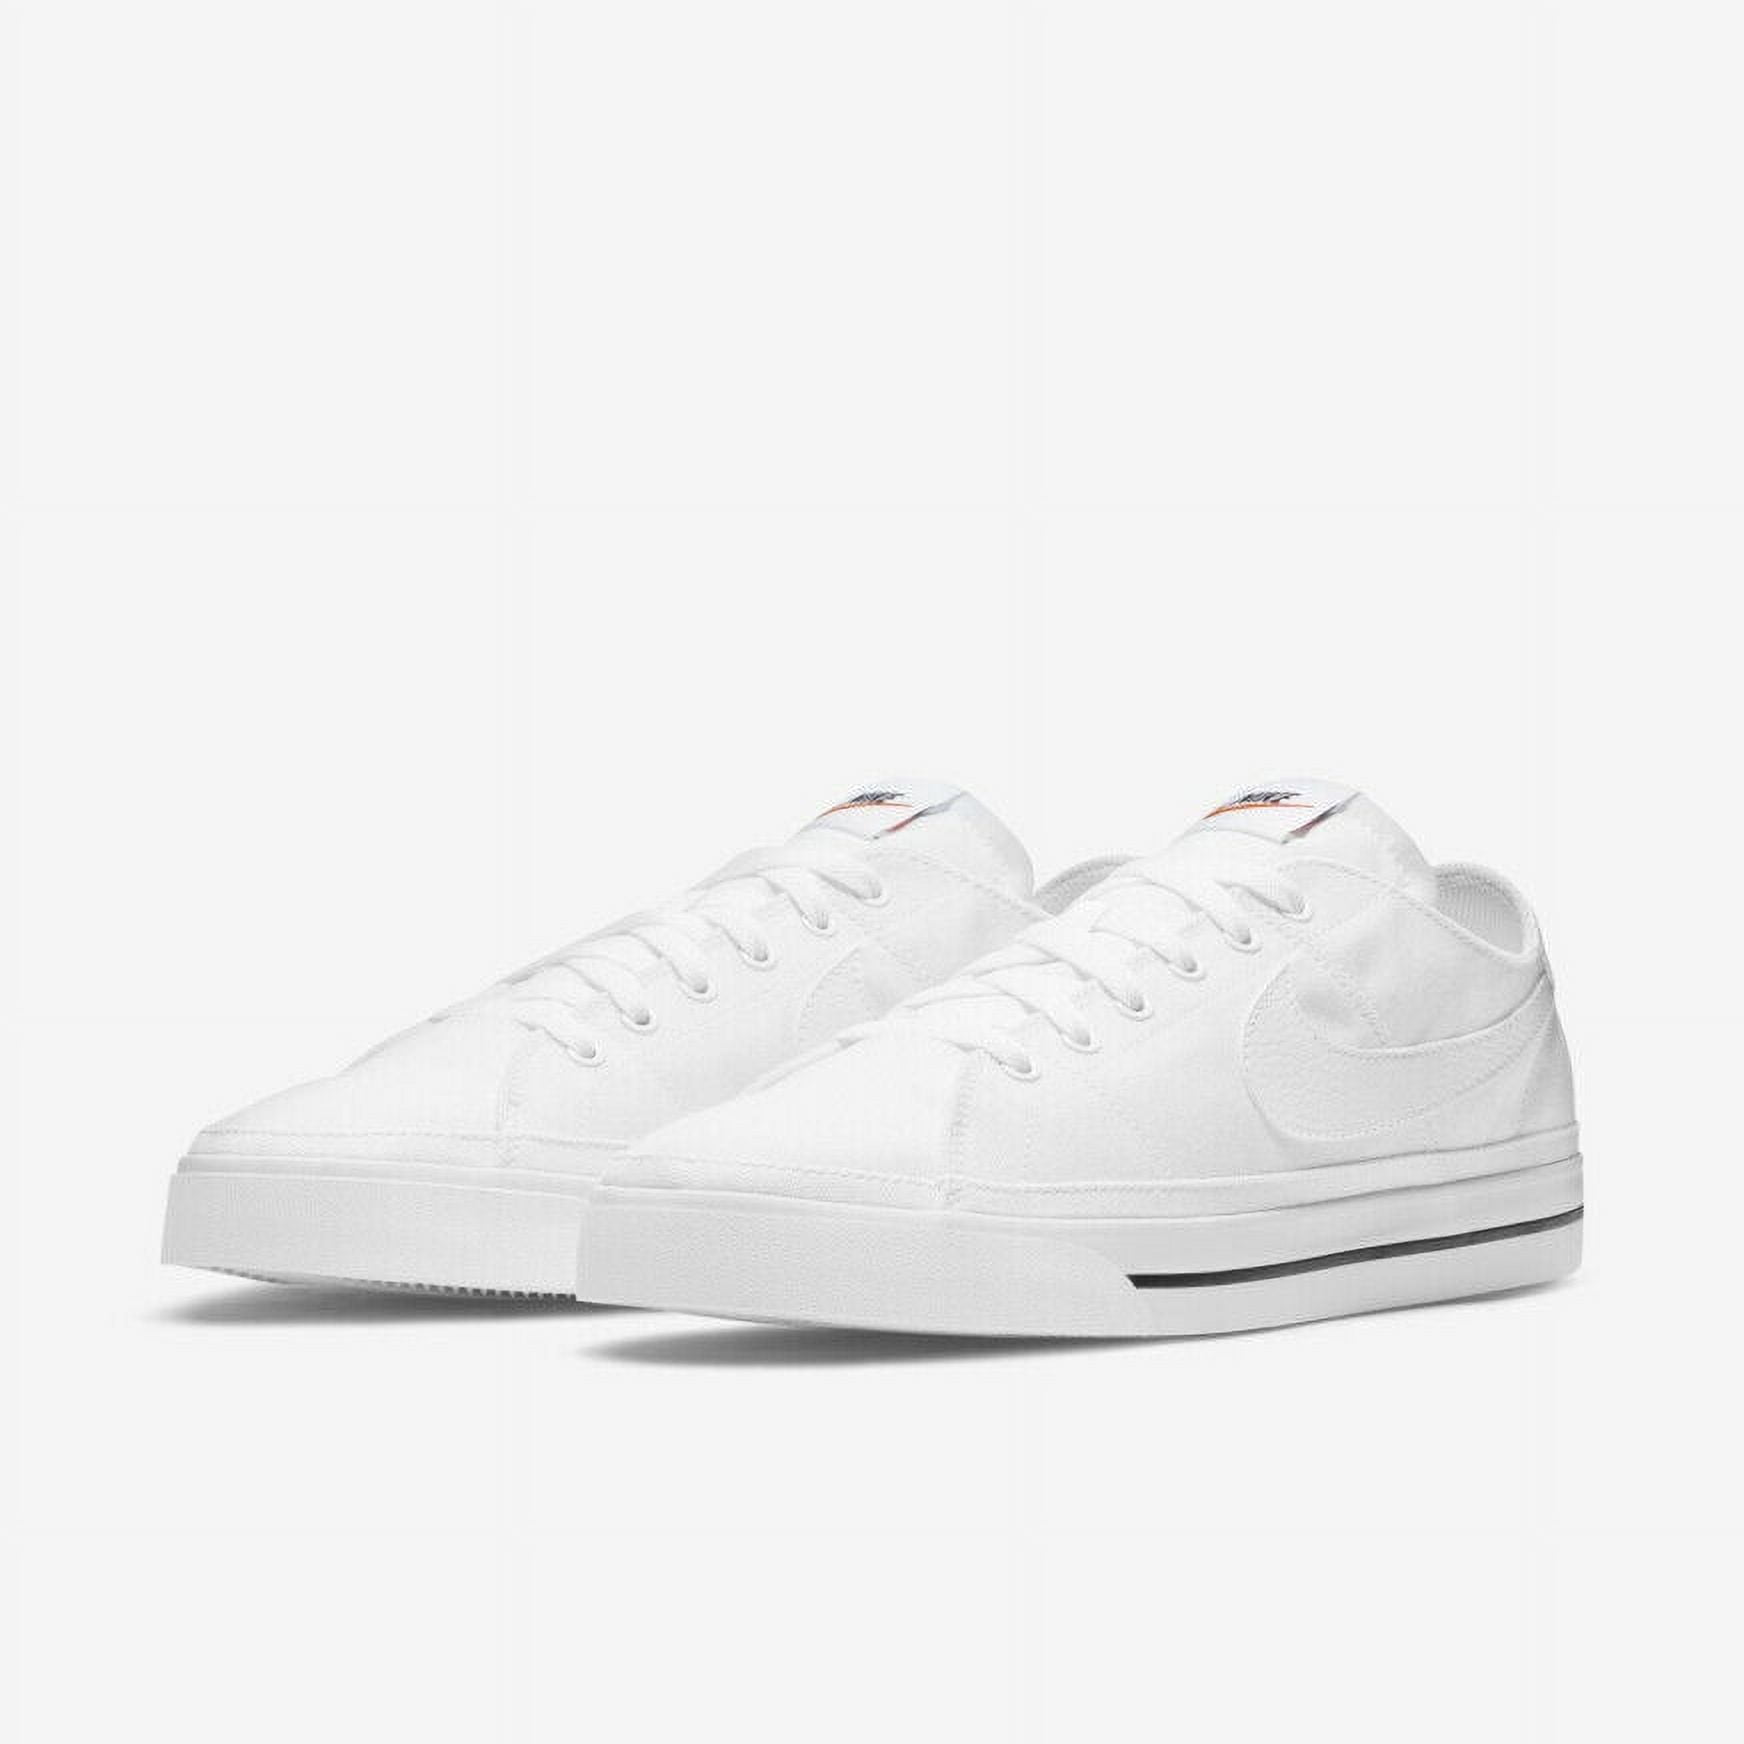 Canvas White Sneakers (10.5) Athletic Shoes TV179 Court CW6539-100 Legacy Men\'s Nike